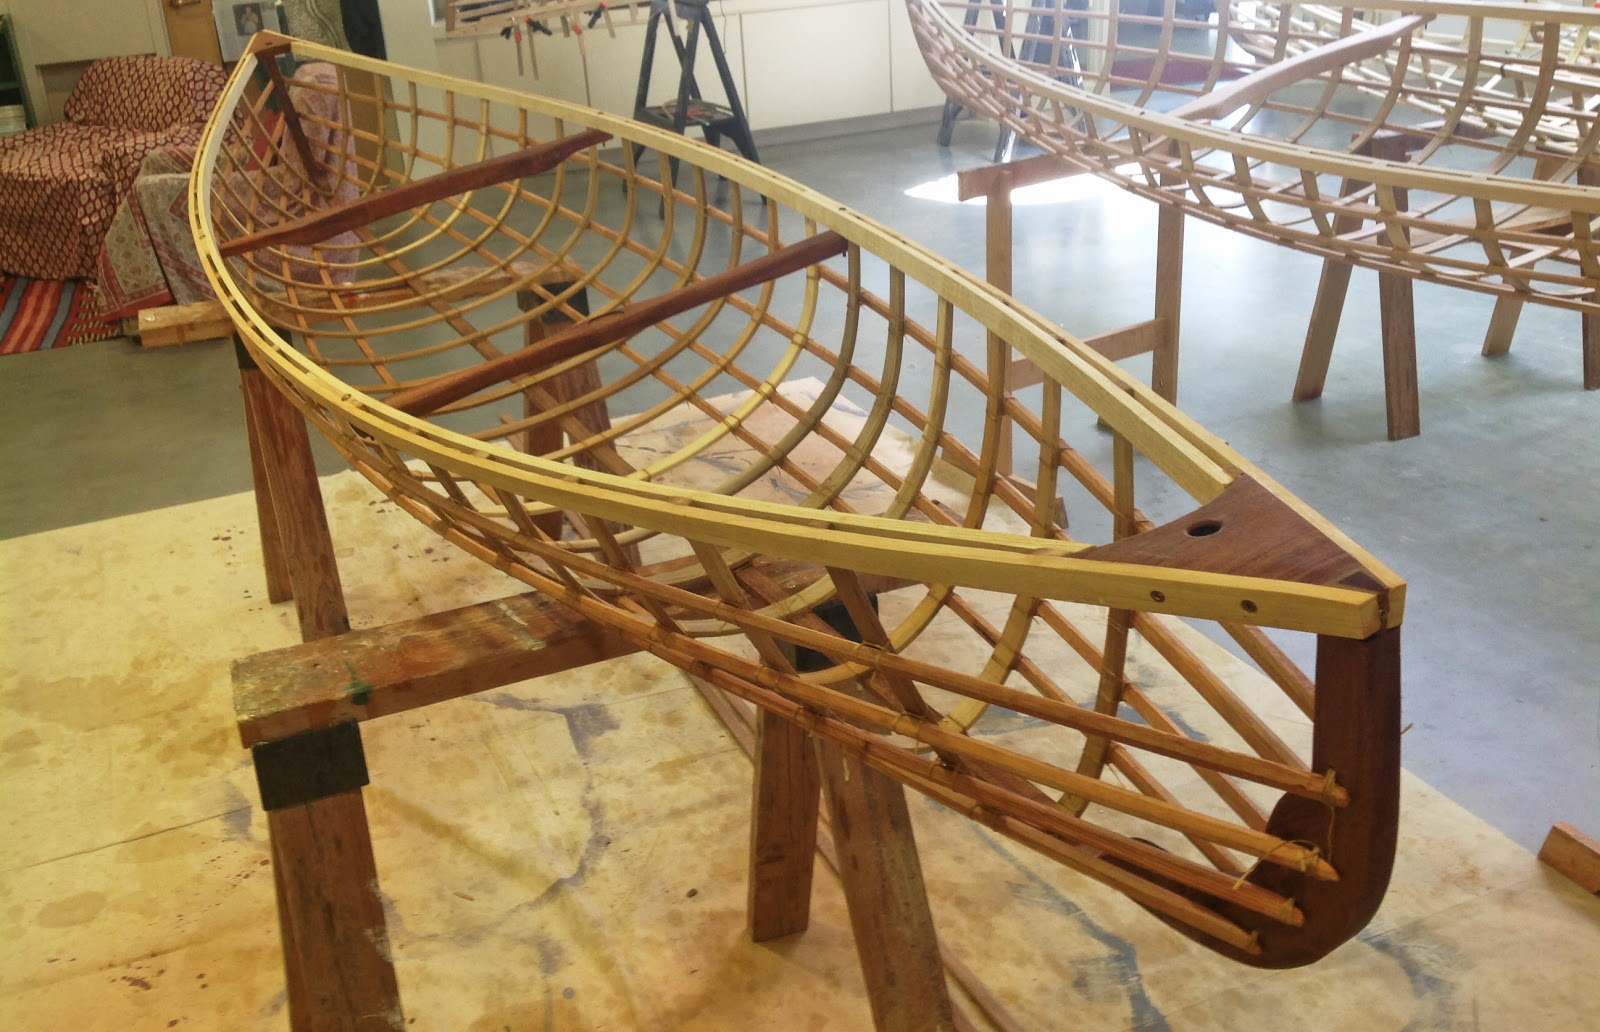 Sarum Boats: Frames nearly done